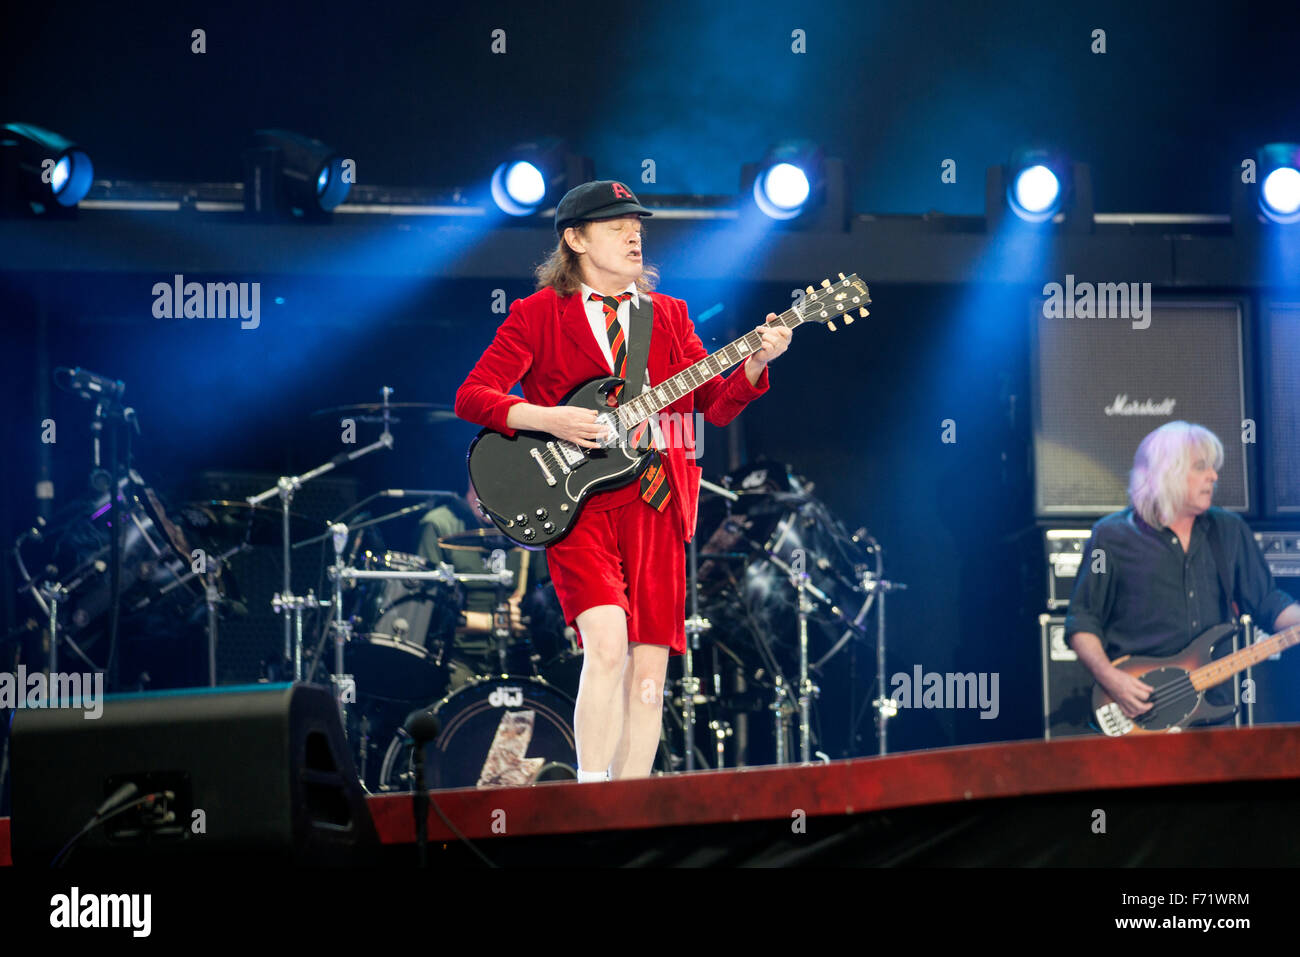 Musician Angus Young of AC/DC performs at Hampden Park National Stadium on June 28, 2015 in Glasgow, United Kingdom Stock Photo